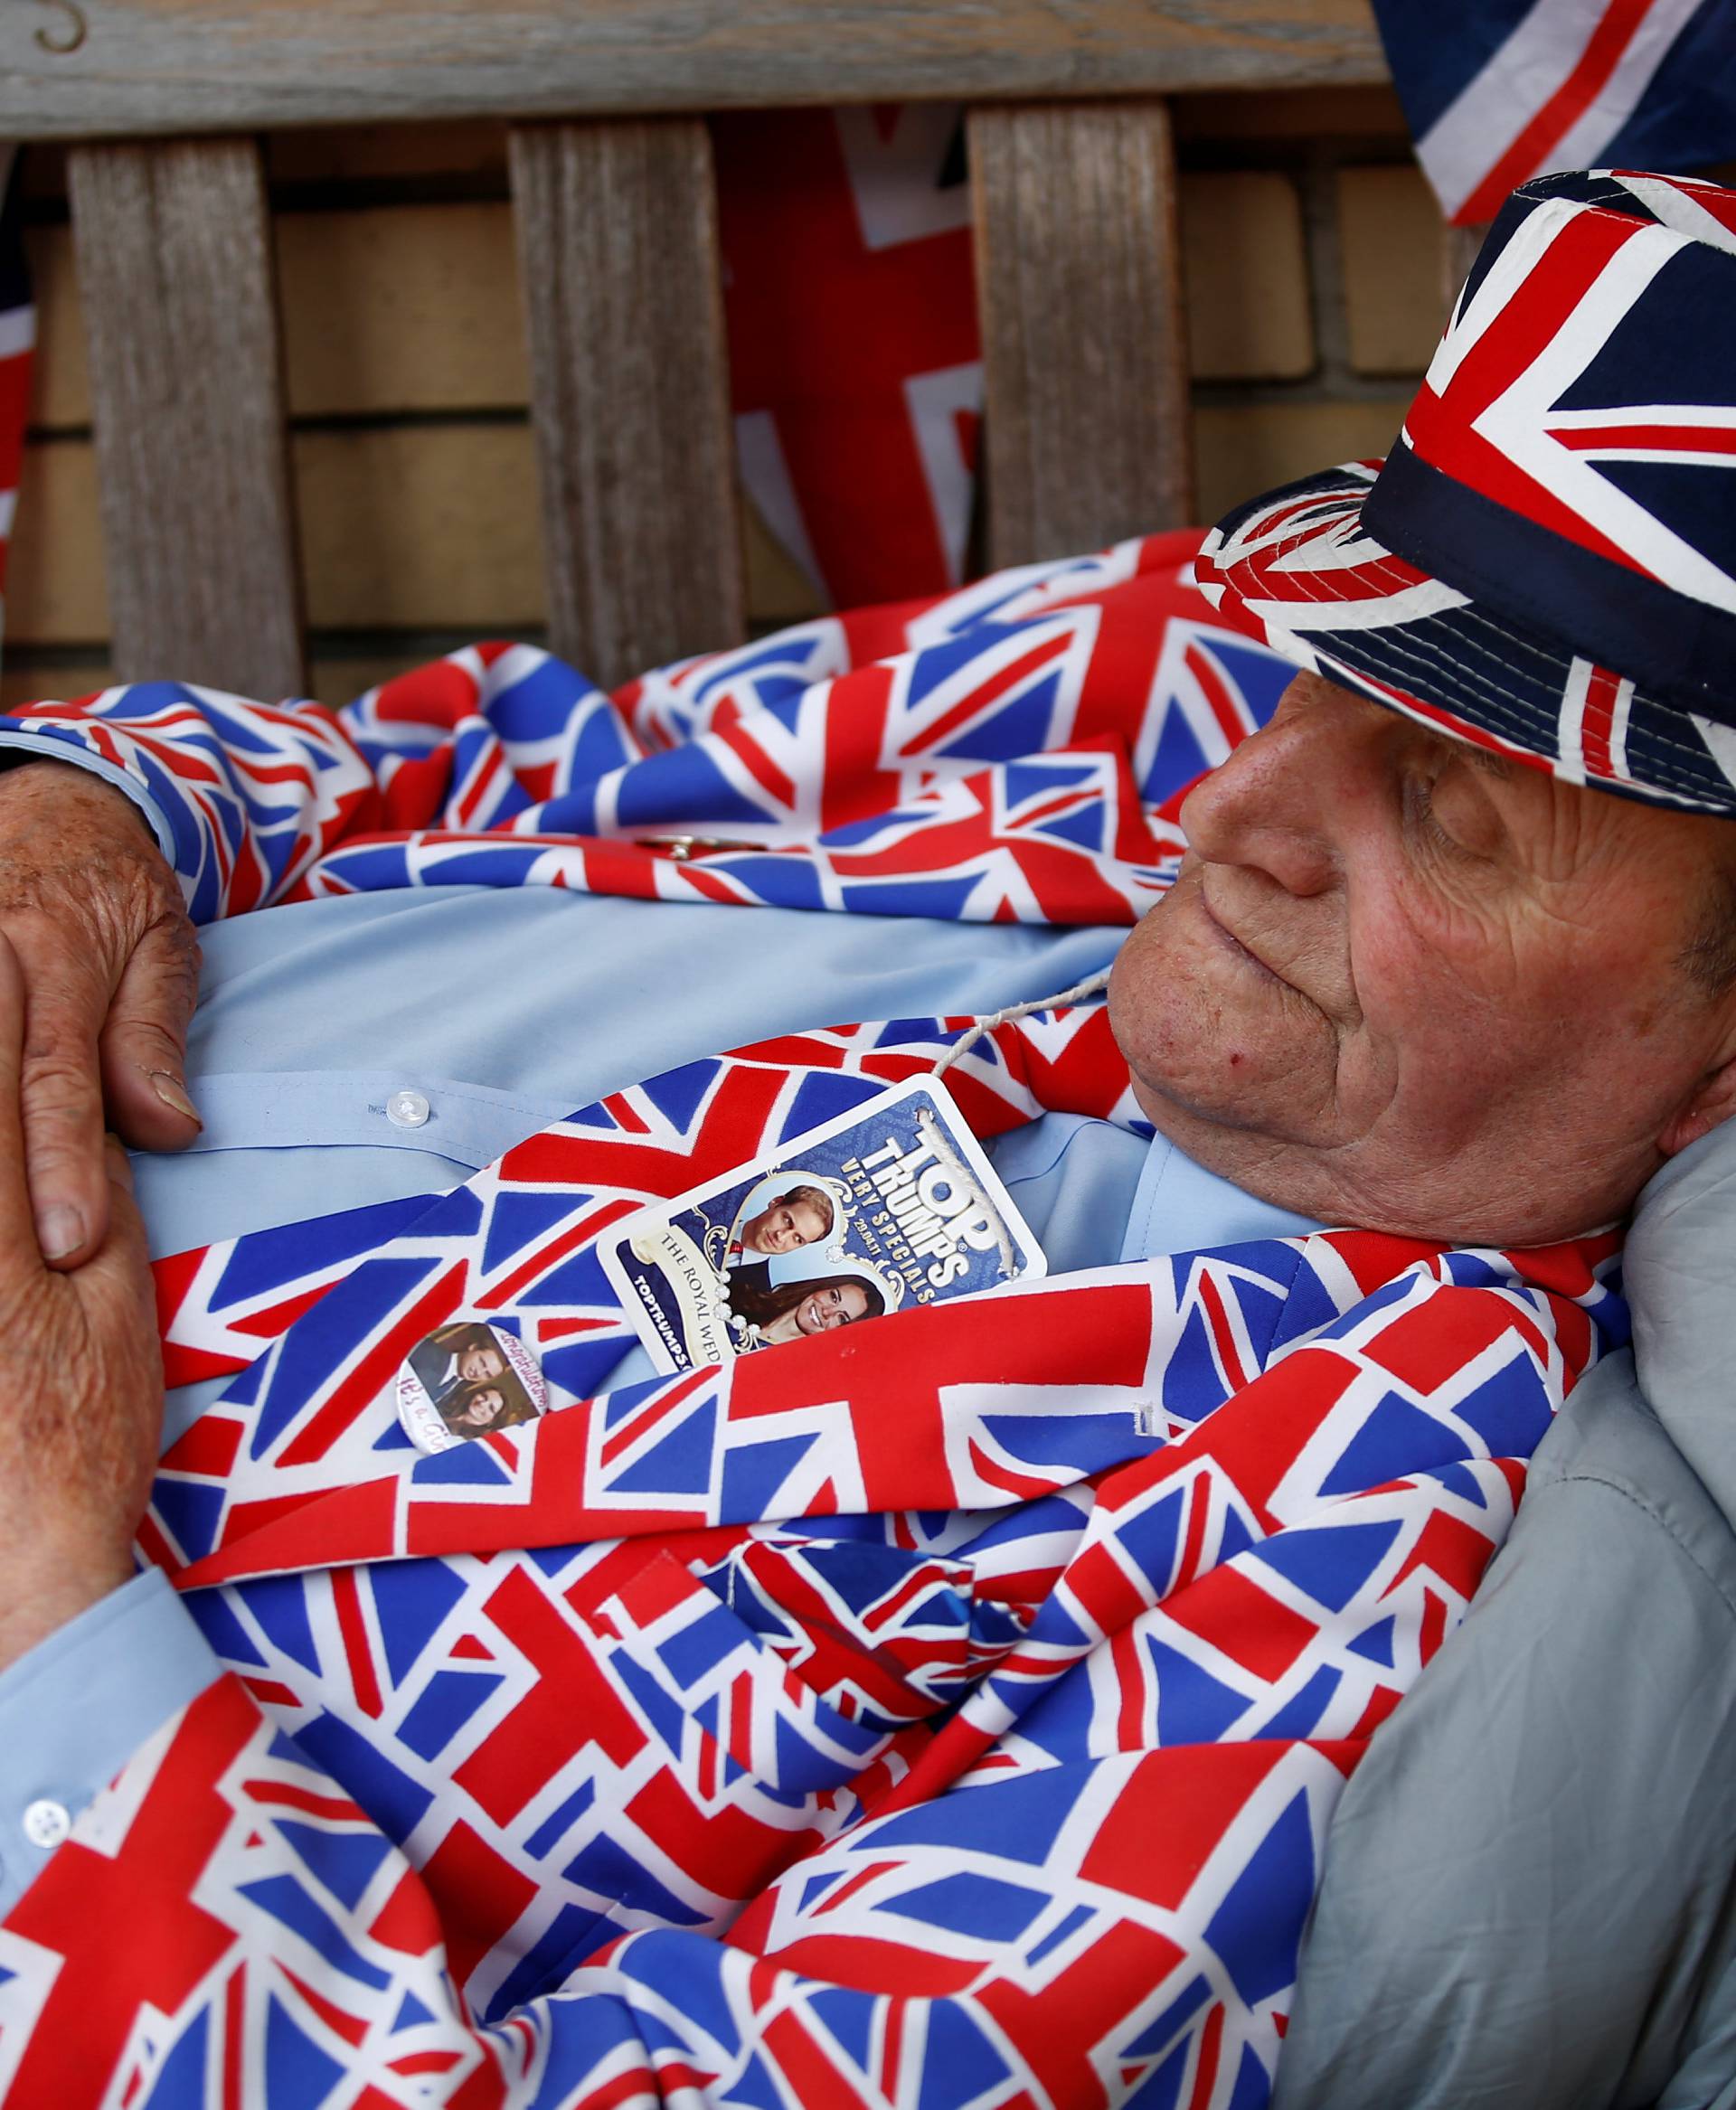 A fan of Britain's royal family camps outside the hospital where Catherine, Duchess of Cambridge is due to give birth, in London